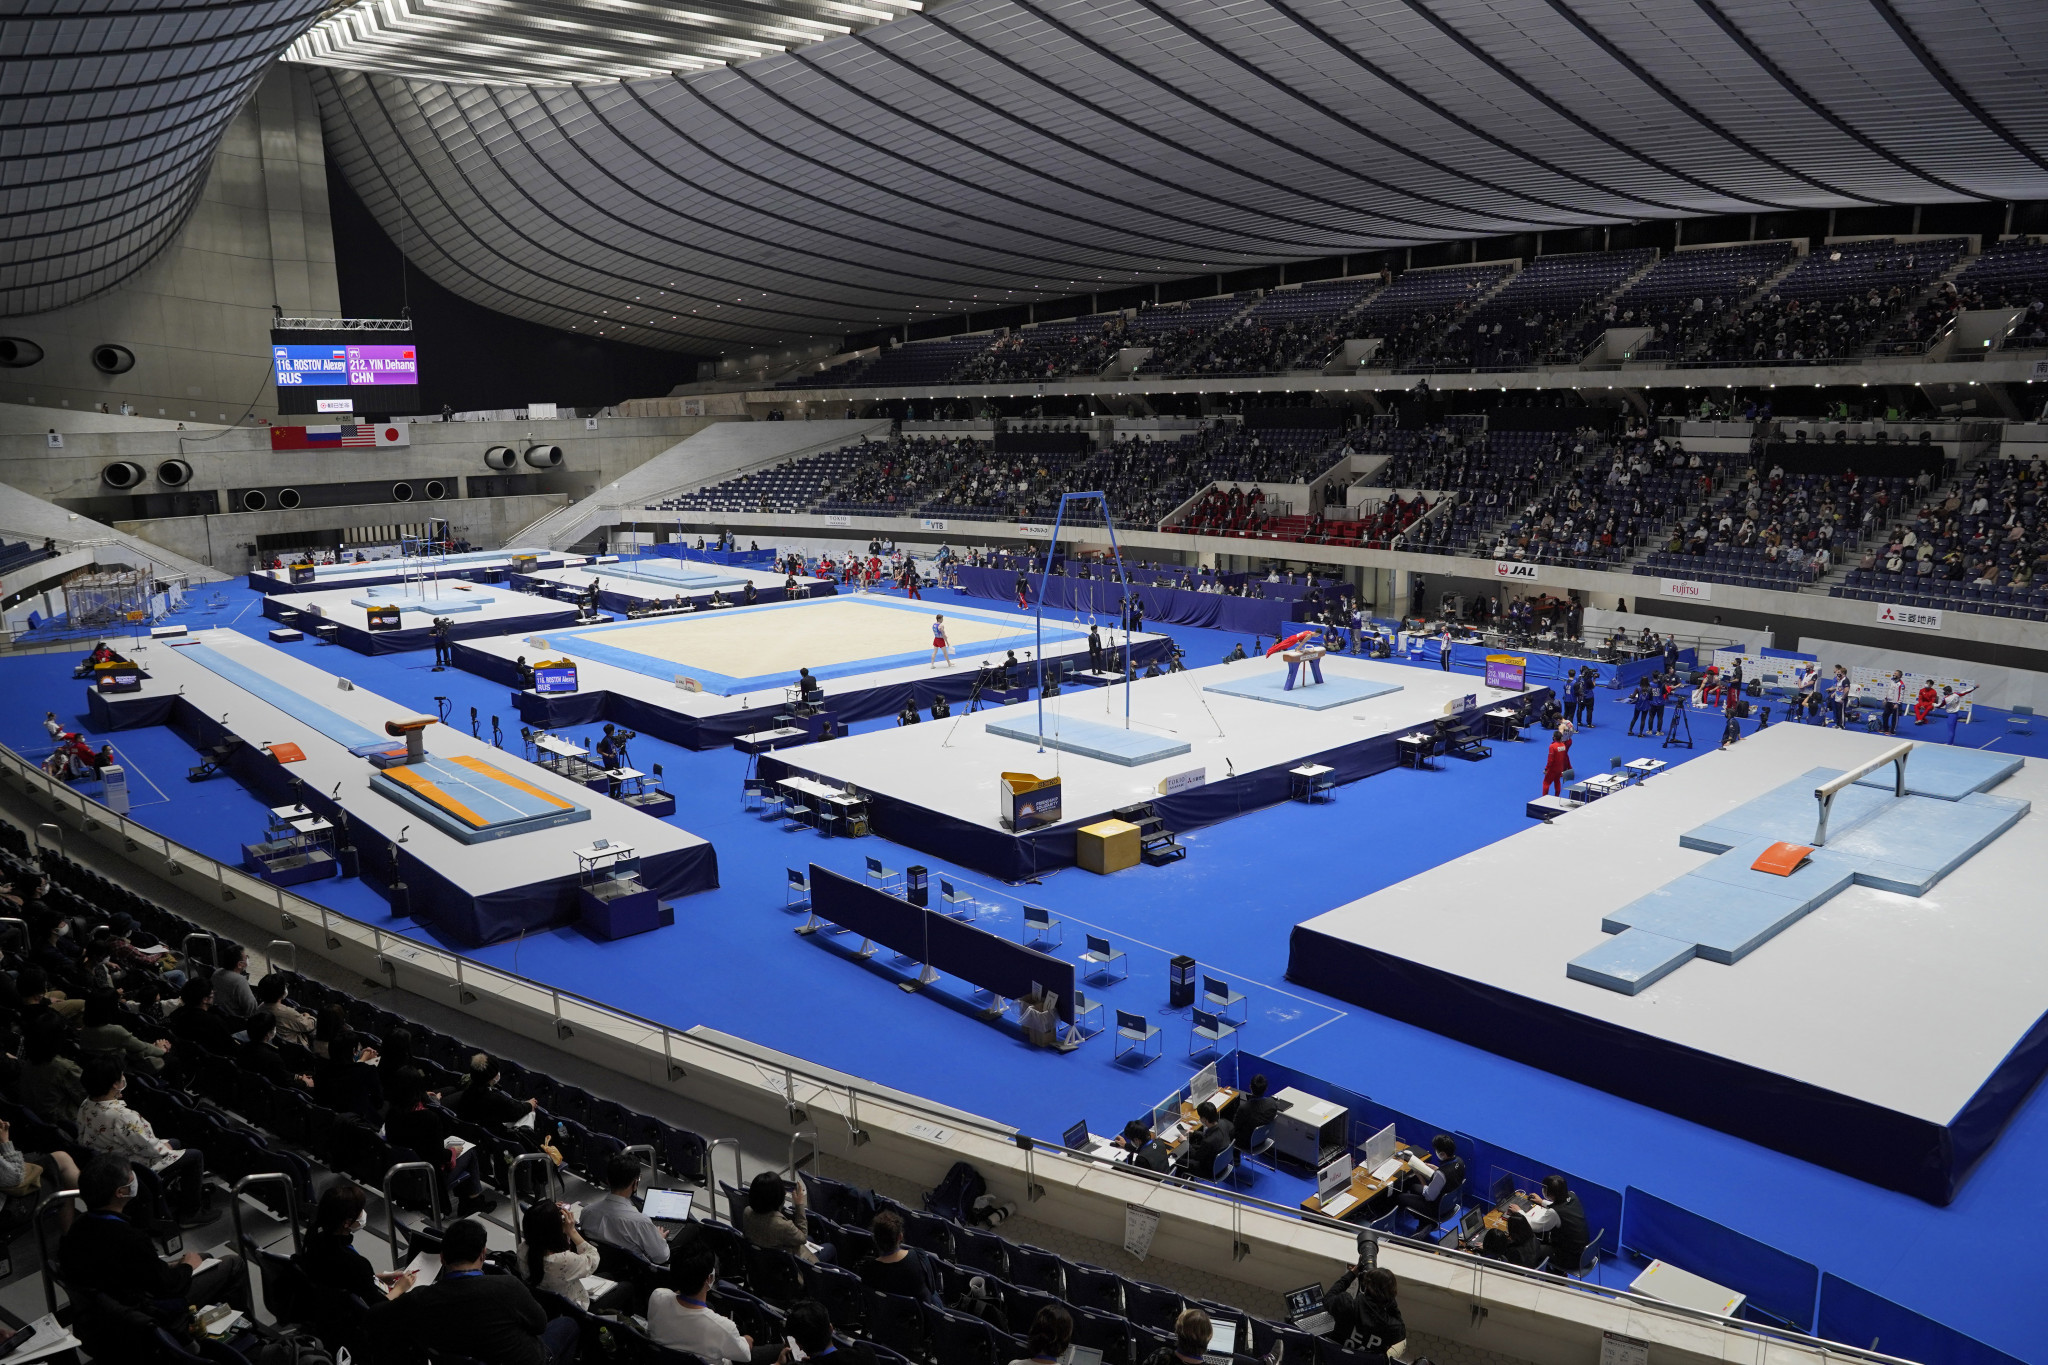 Competition at the Yoyogi National Gymnasium in Tokyo took place with numerous COVID-19 protocols in place ©Getty Images